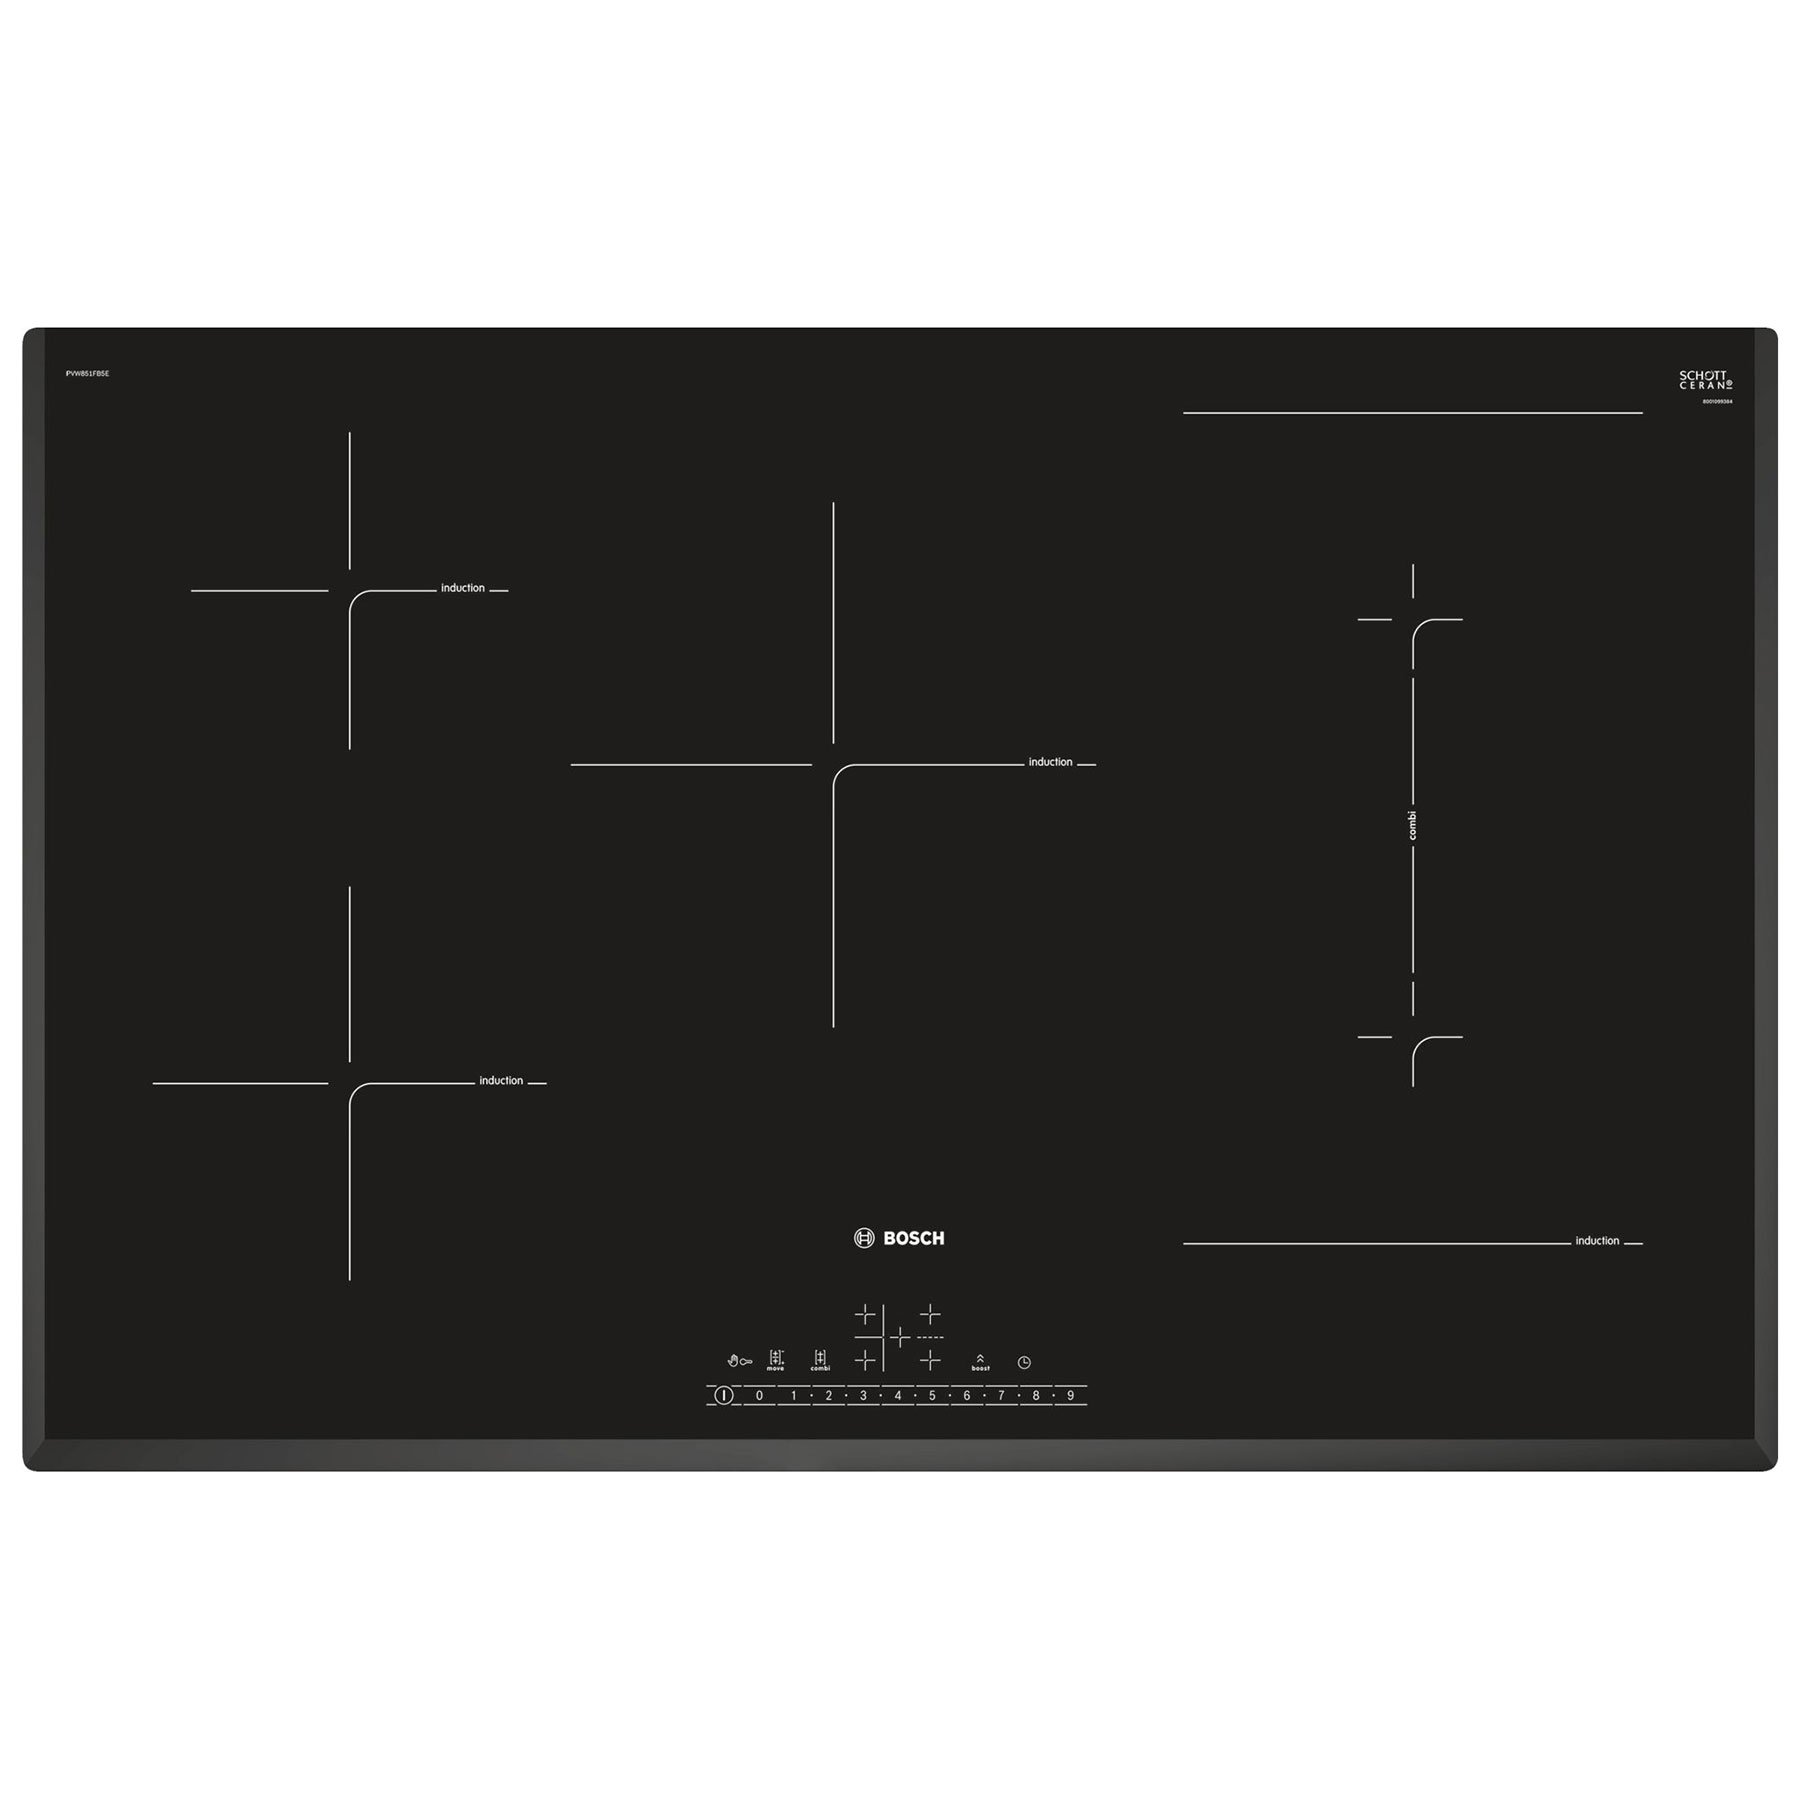 Image of Bosch PVW851FB5E Series 6 80cm 5 Zone Induction Hob in Black Glass